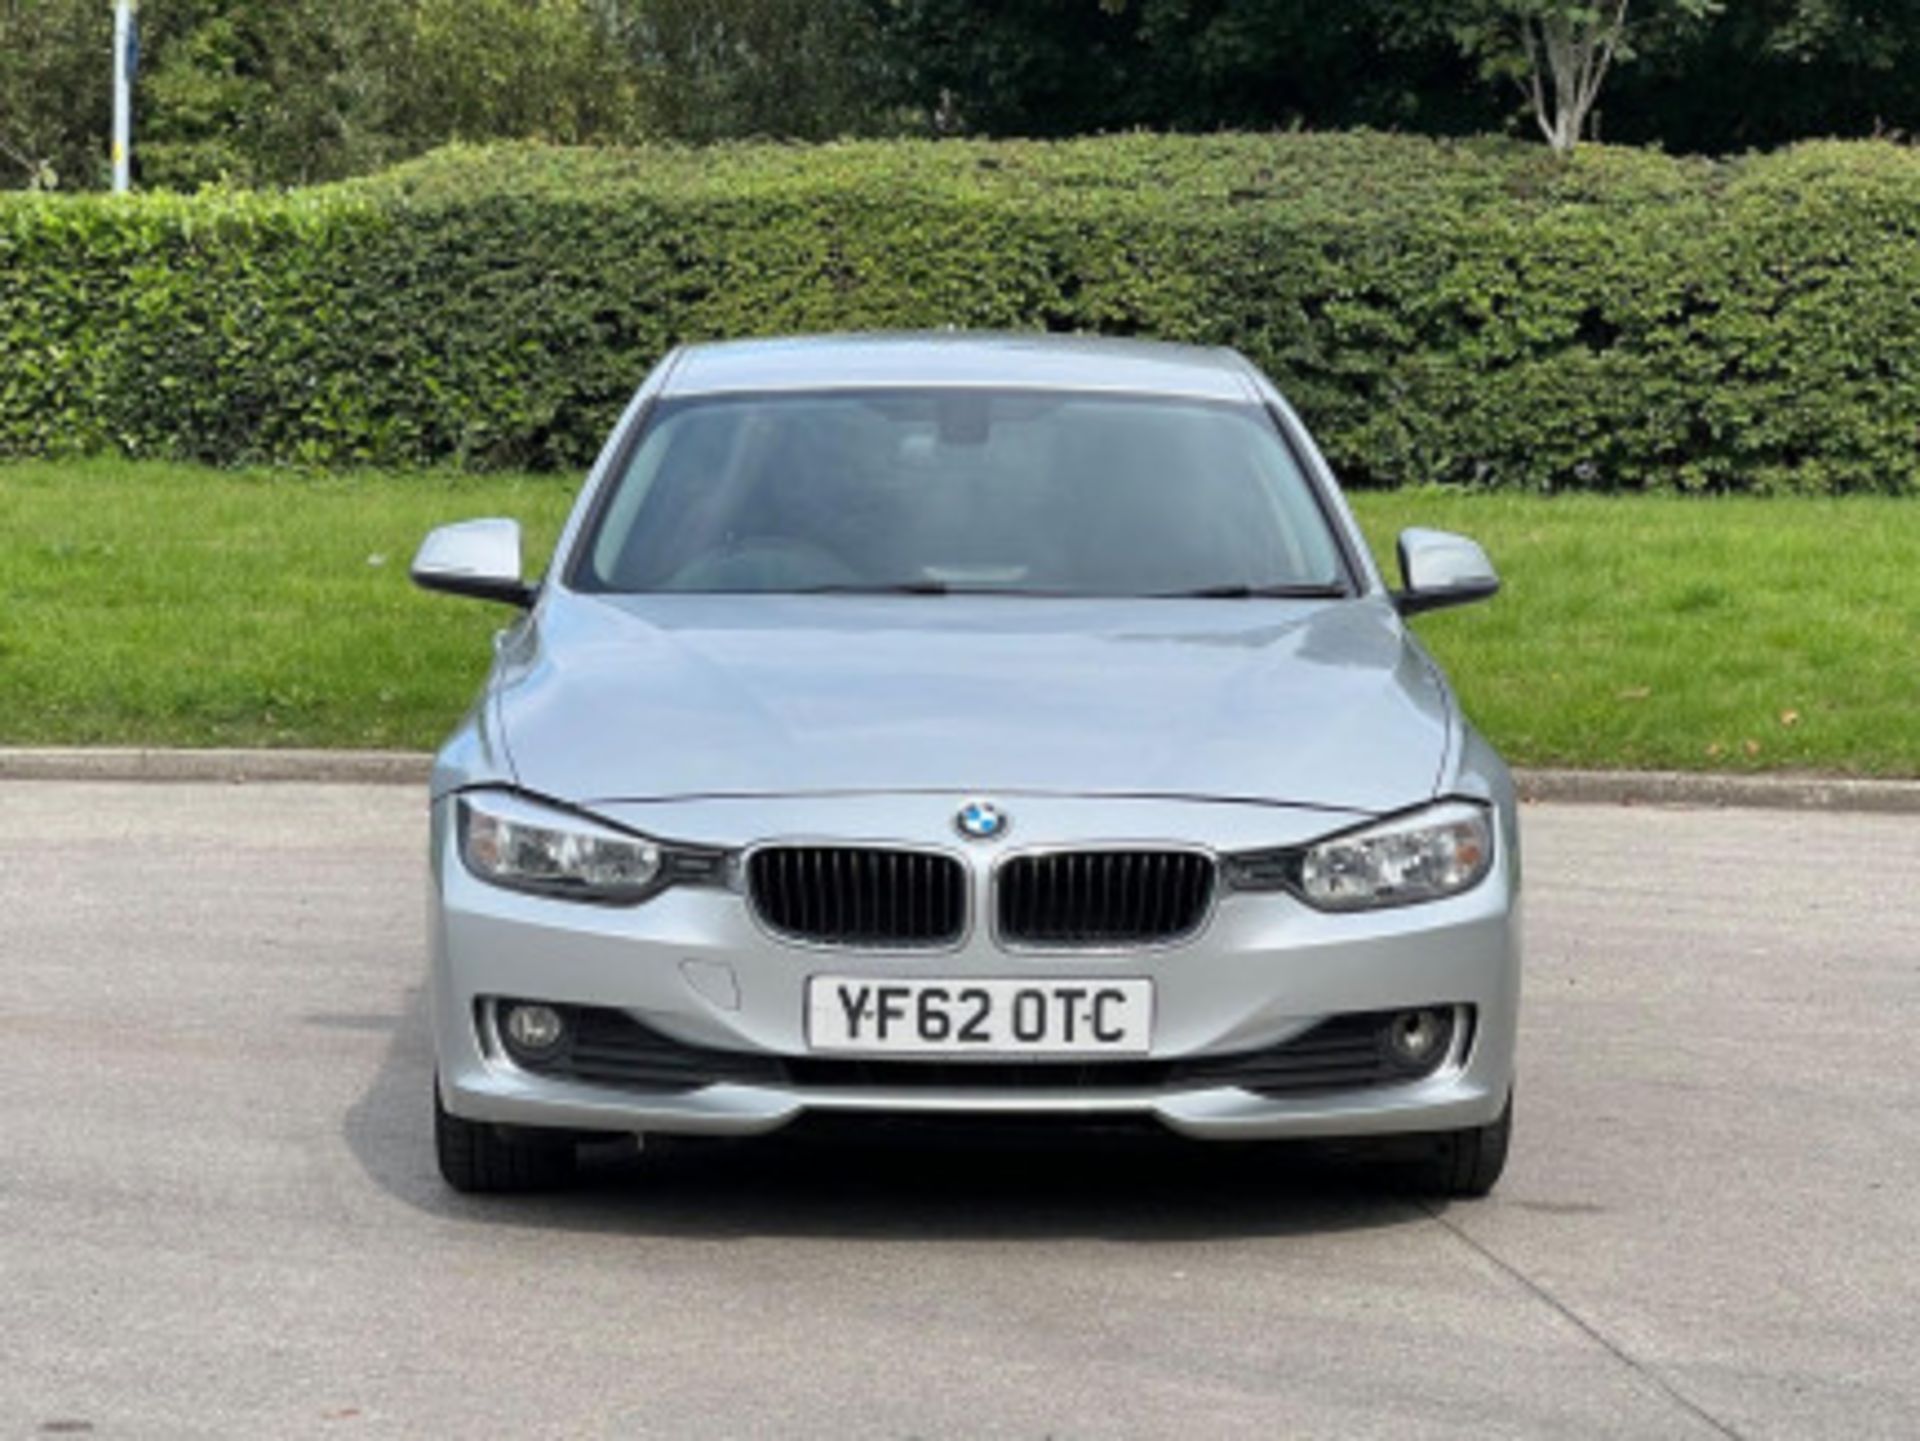 BMW 3 SERIES 2.0 DIESEL ED START STOP - A WELL-MAINTAINED GEM >>--NO VAT ON HAMMER--<< - Image 132 of 229